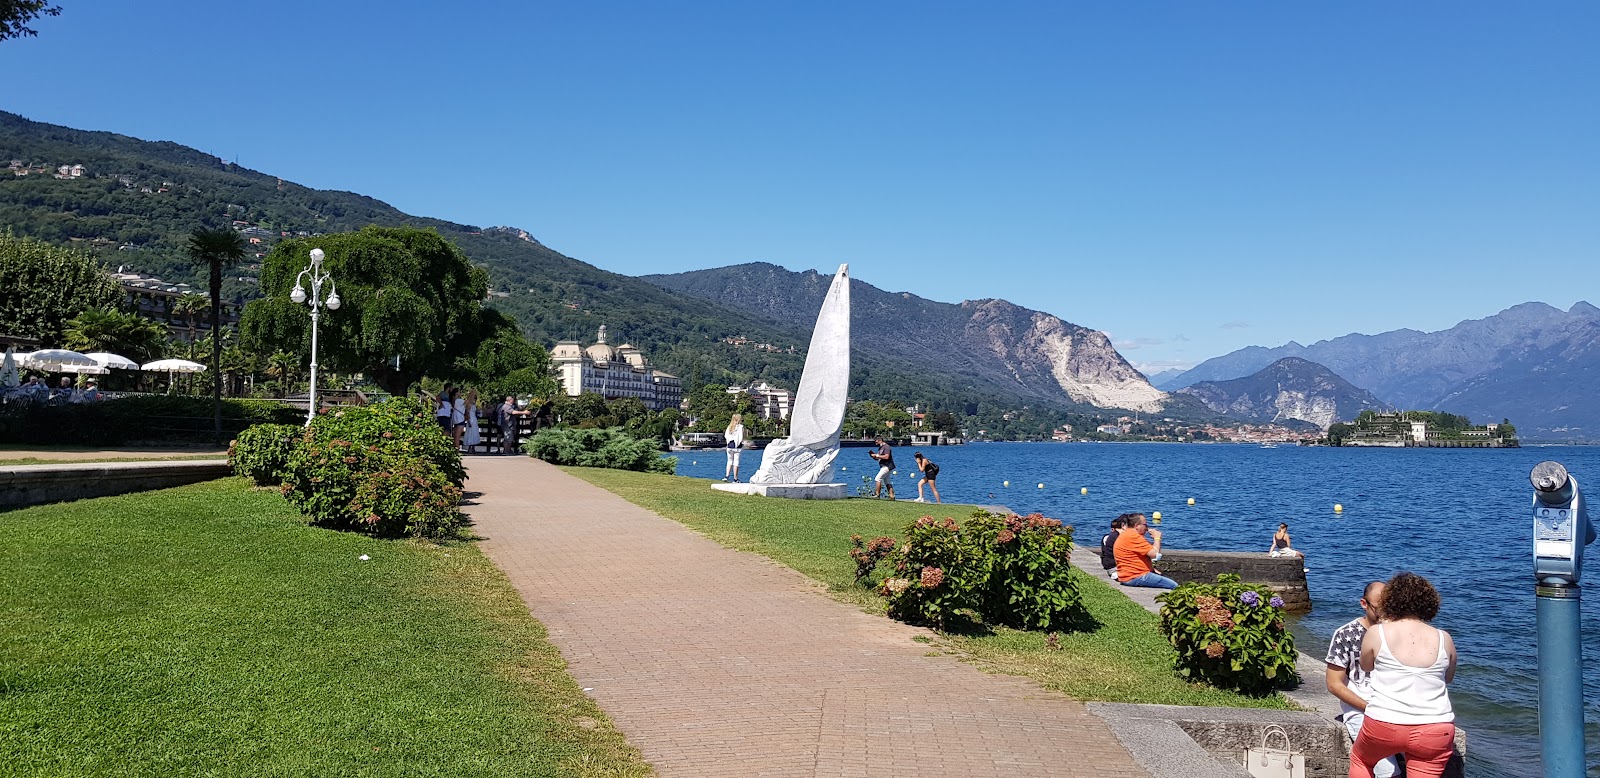 Photo of Spiaggia di Stresa backed by cliffs